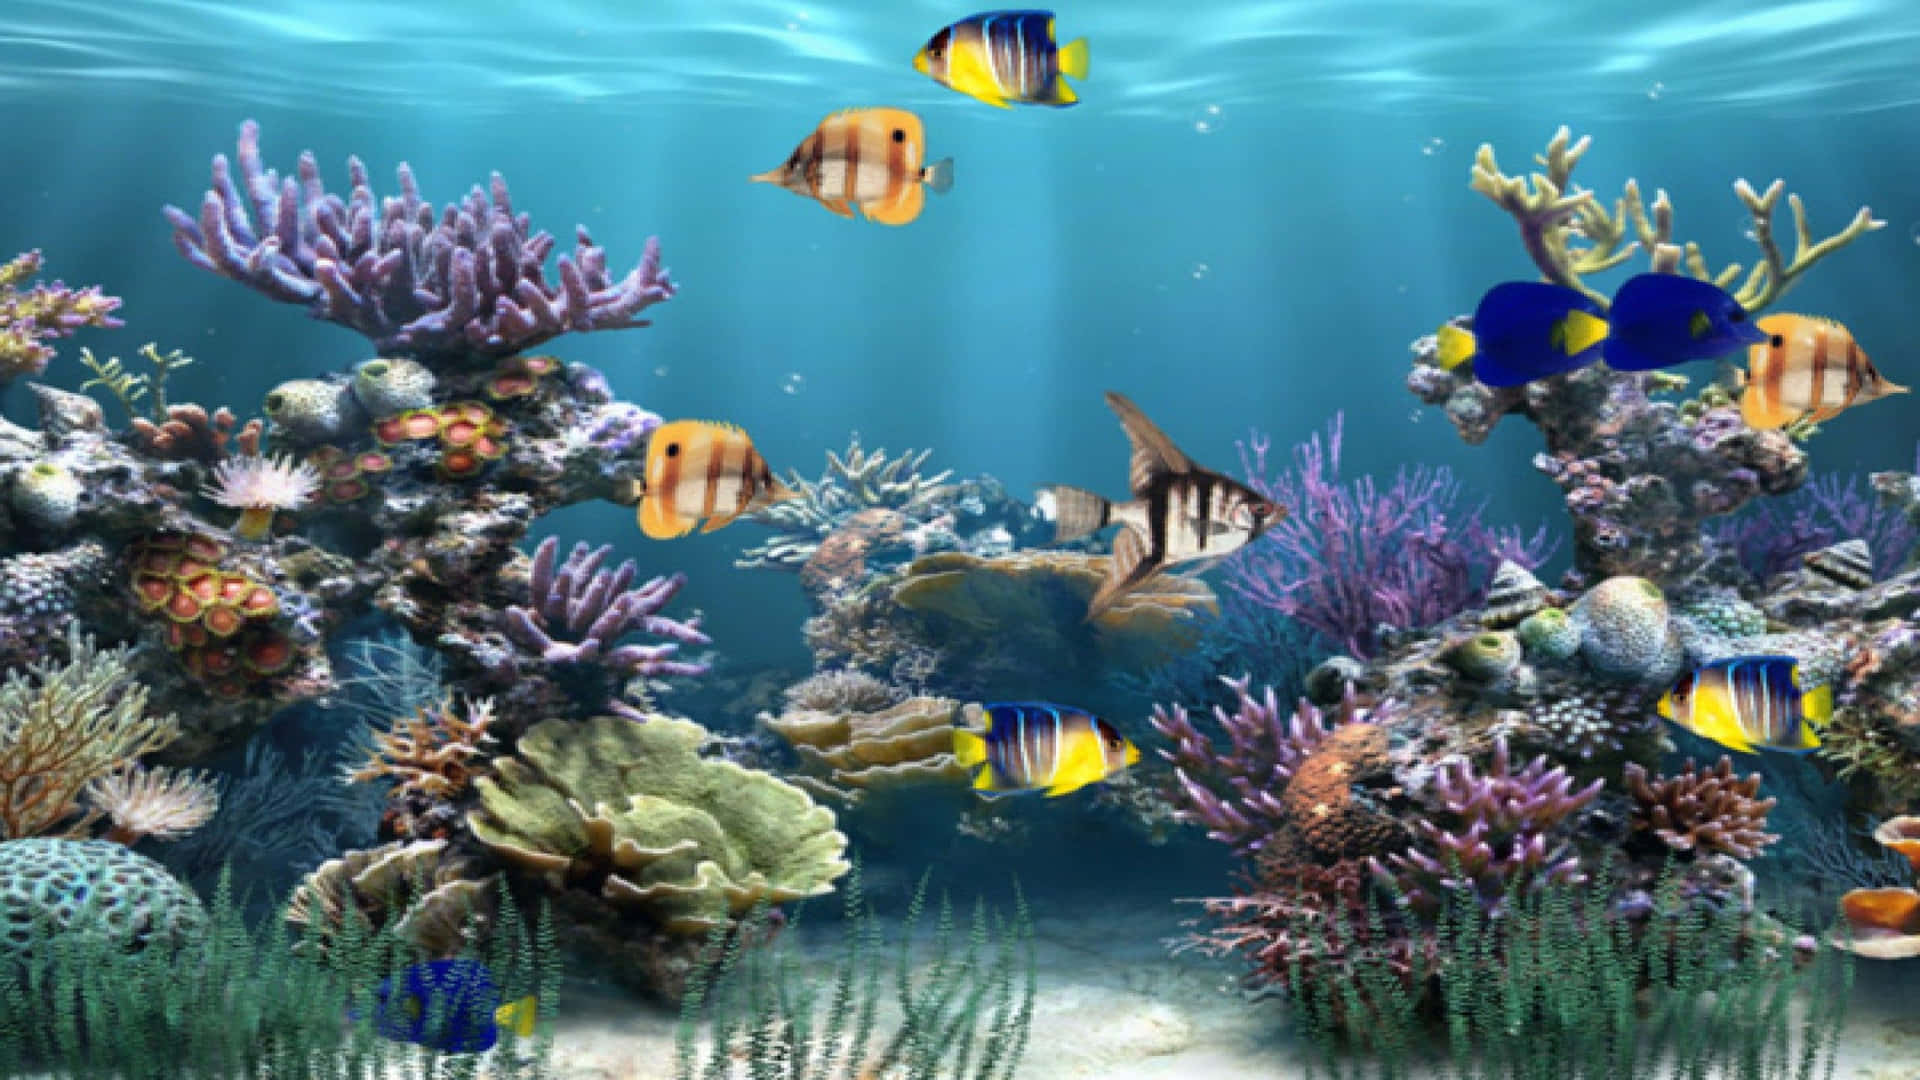 Underwater Animated Desktop Background Zoom Wallpapers Images And ...